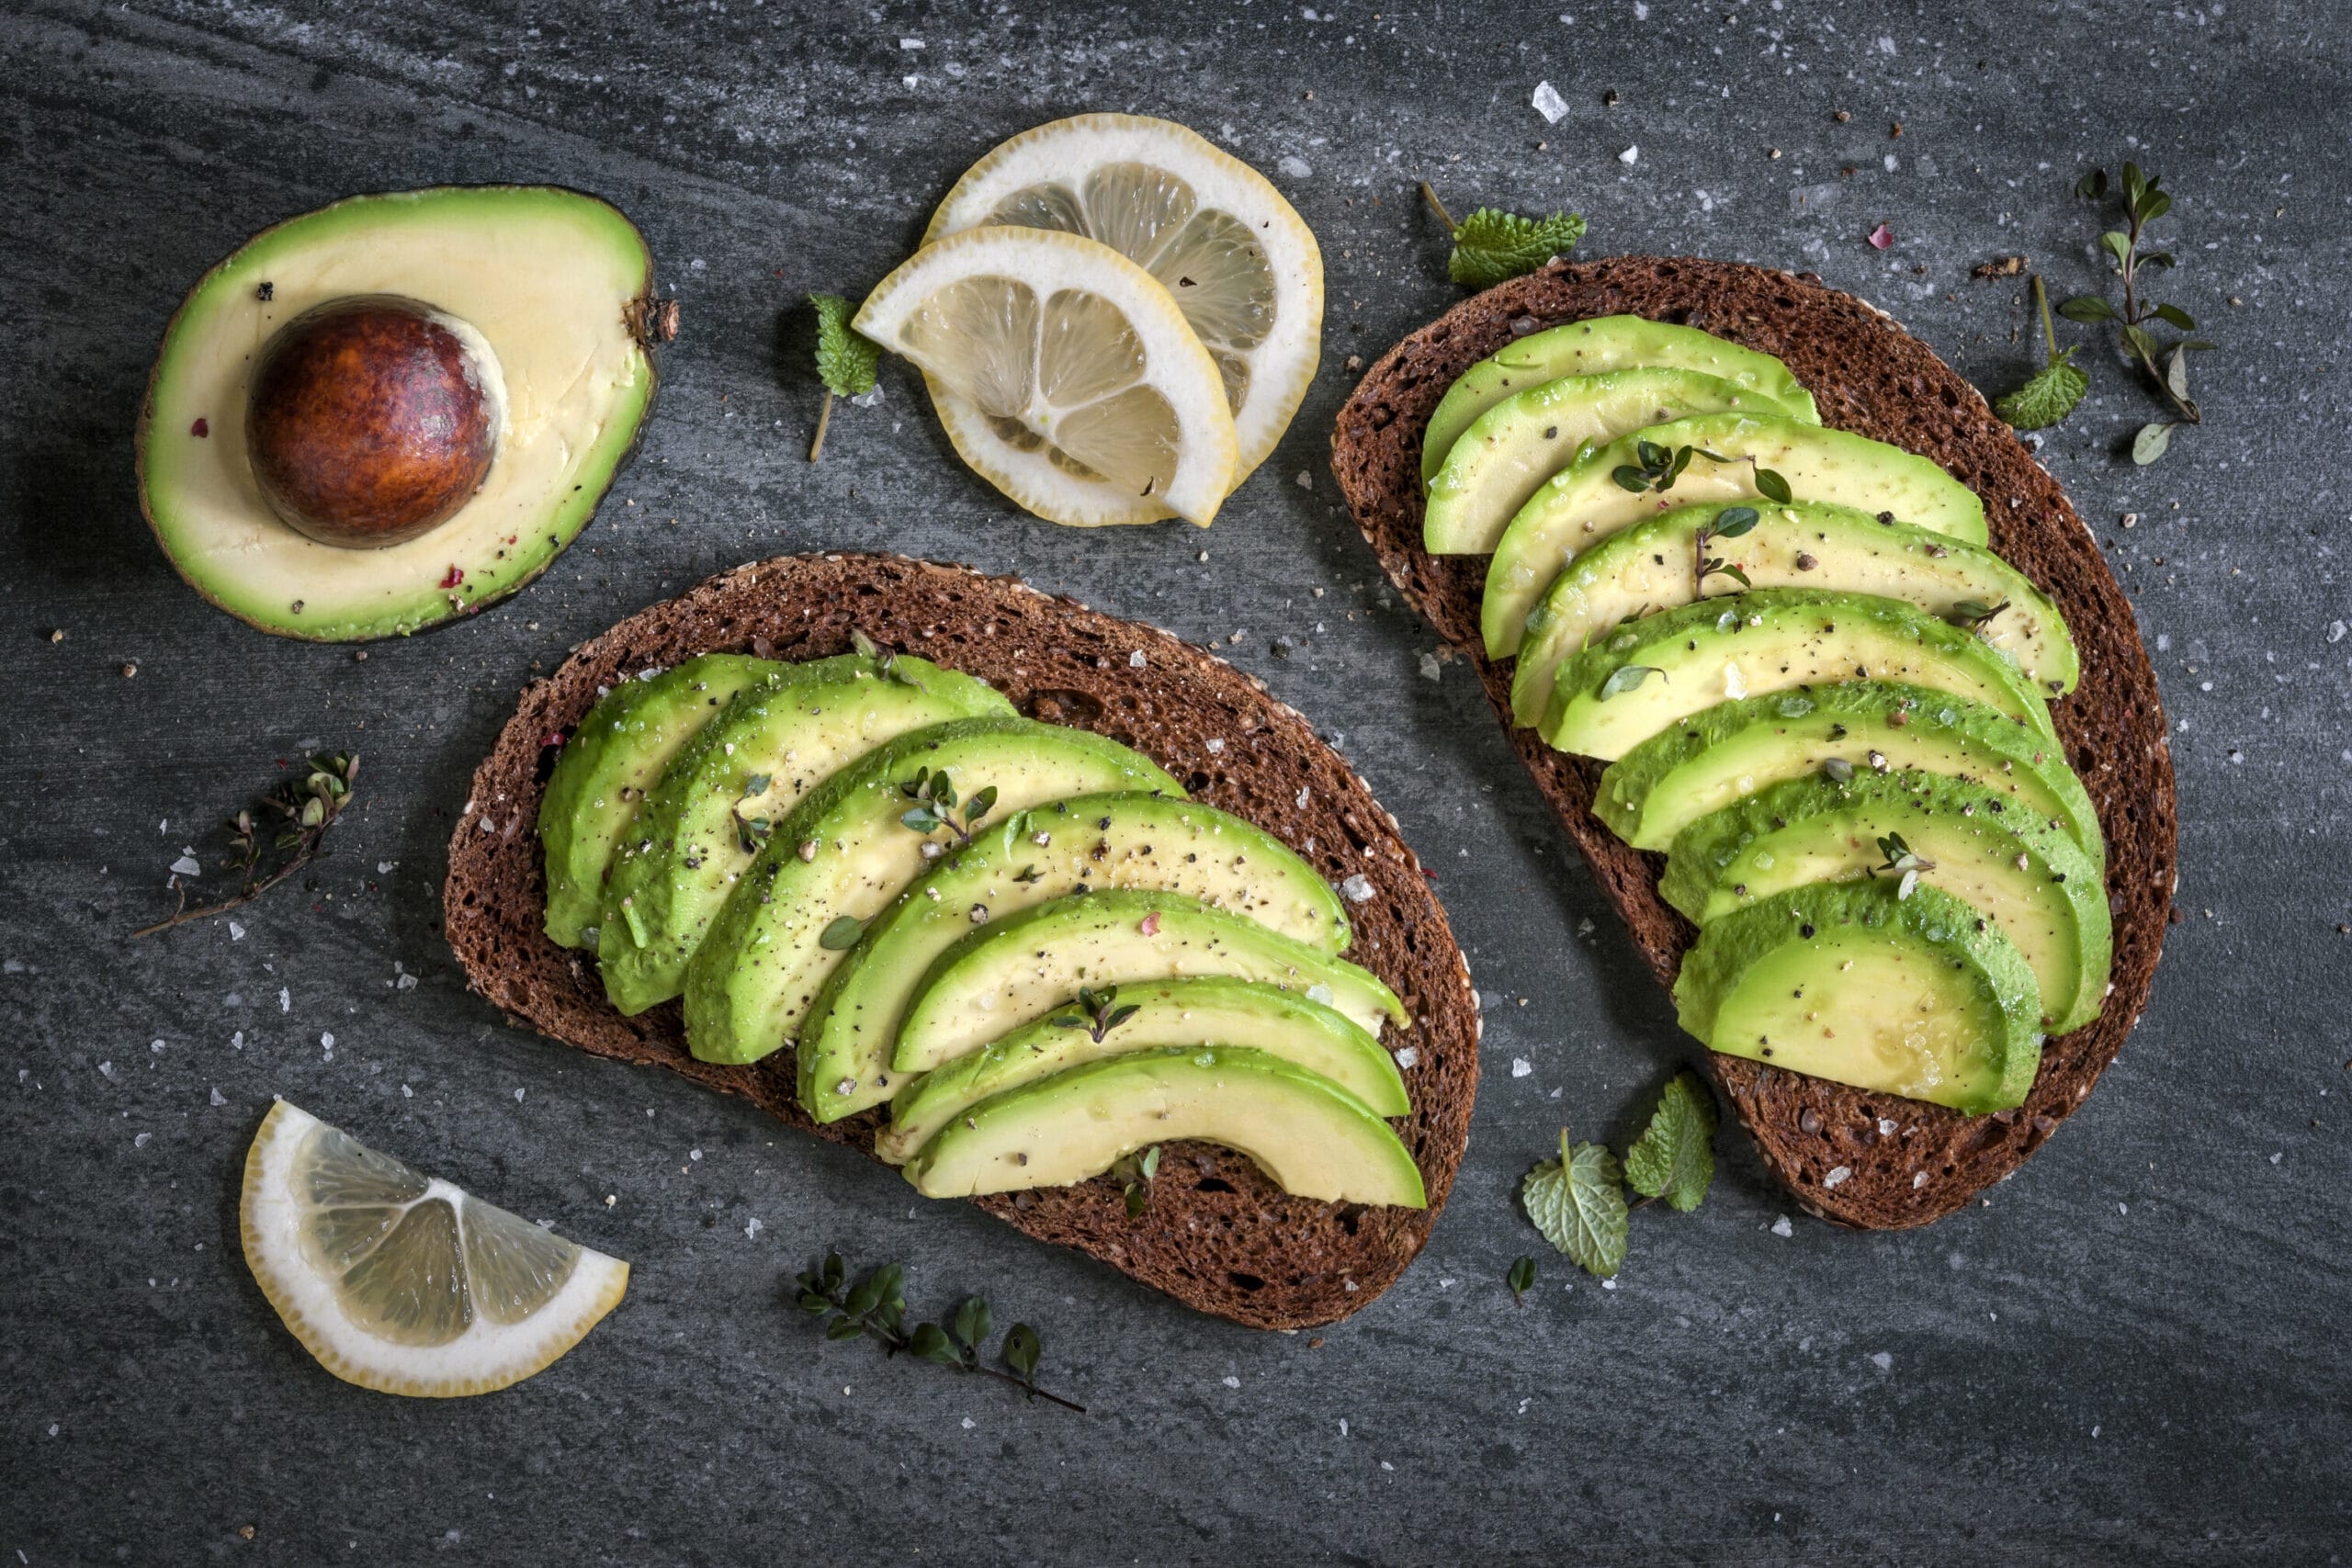 Are you ready for a summer of sport fuelled by avocado?